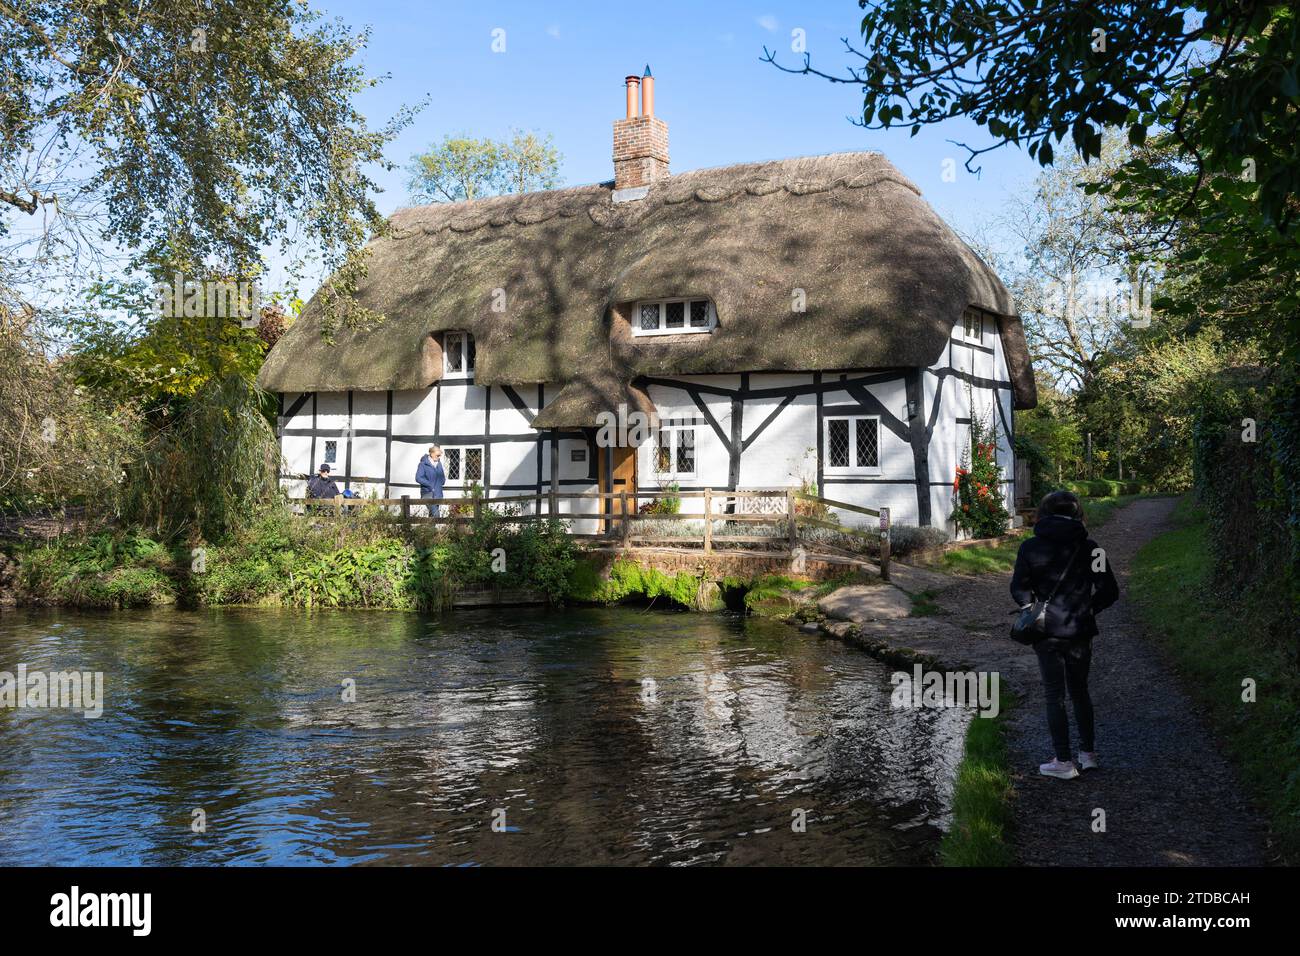 Visitors at the Fulling mill on the river Alre in New Alresford, previously a mill used for the fulling of sheep's wool cloth. Hampshire, UK Stock Photo